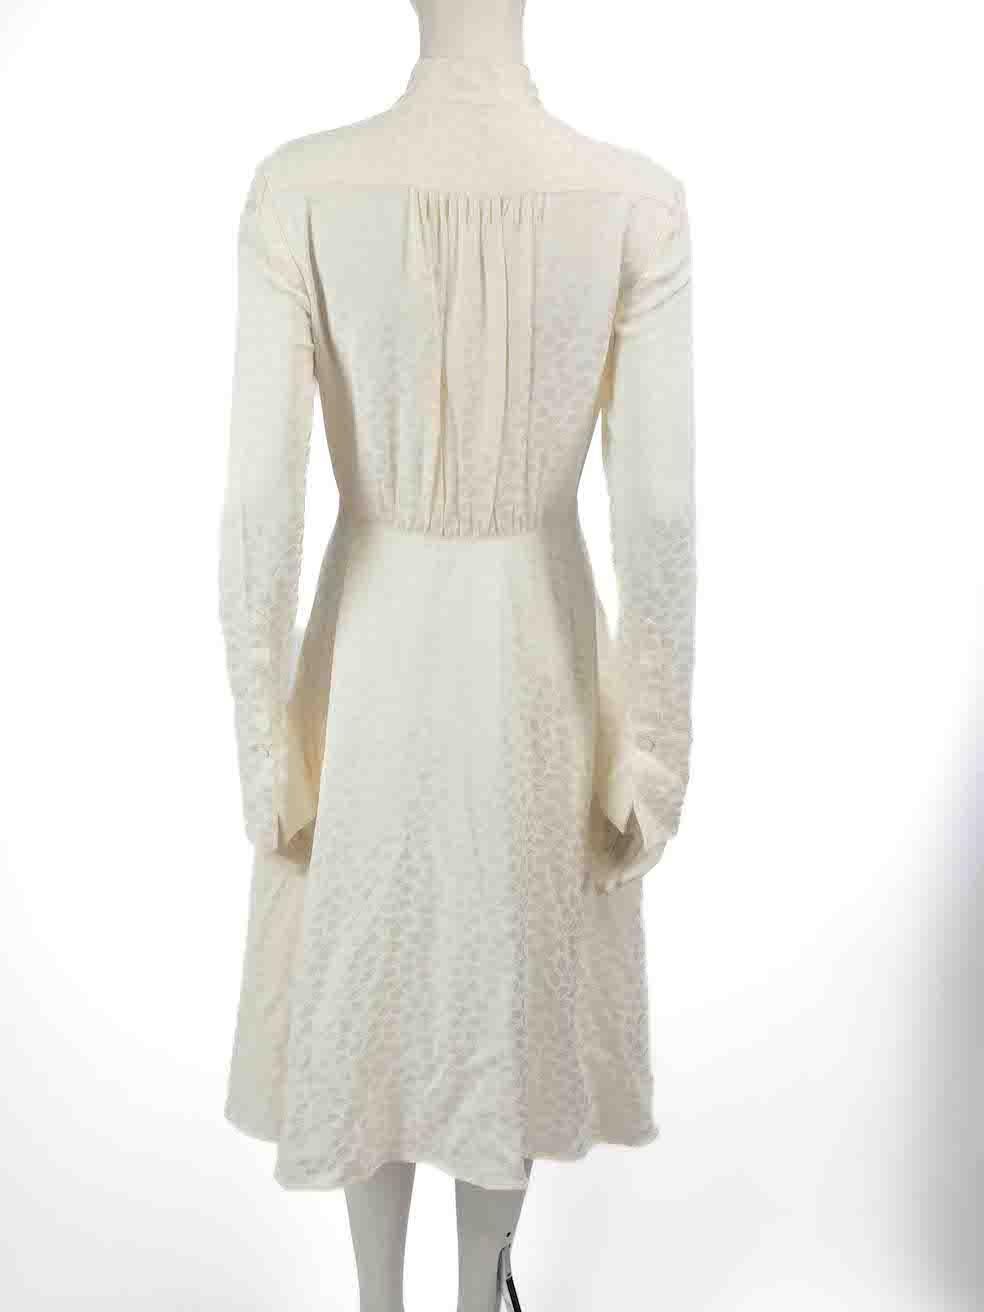 Alexander McQueen White Jacquard Pattern Dress Size S In Excellent Condition For Sale In London, GB